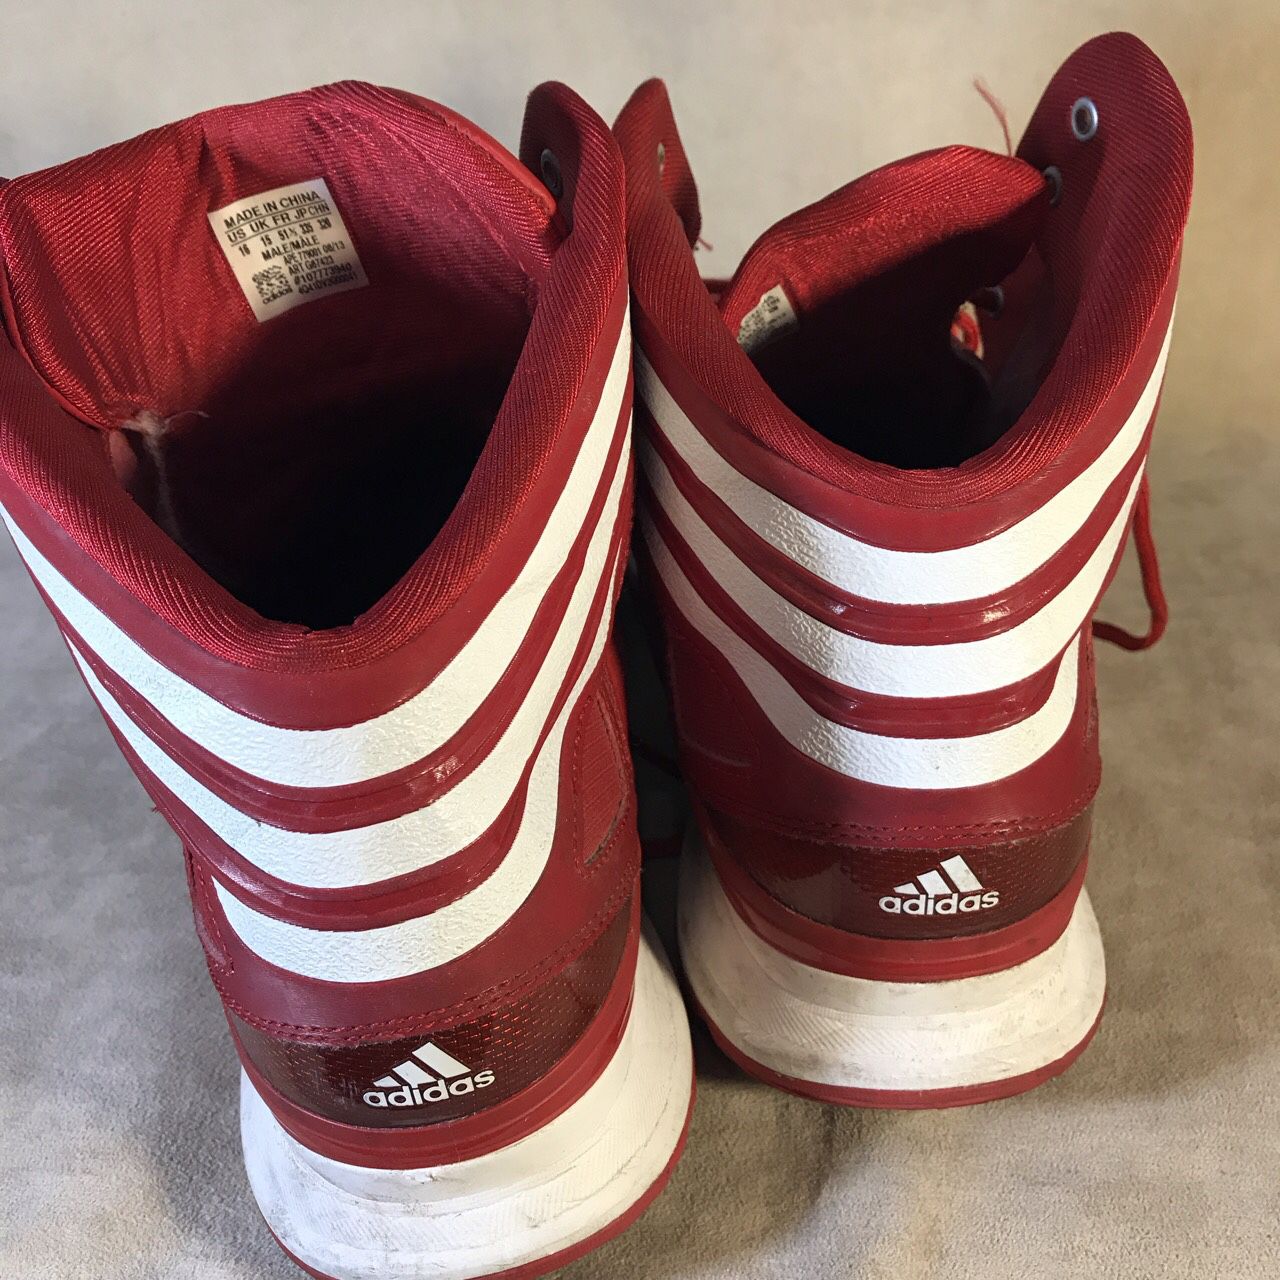 Adidas Ape 779001 Red Basketball Shoes Sneakers Men’s Size 16 for Sale ...